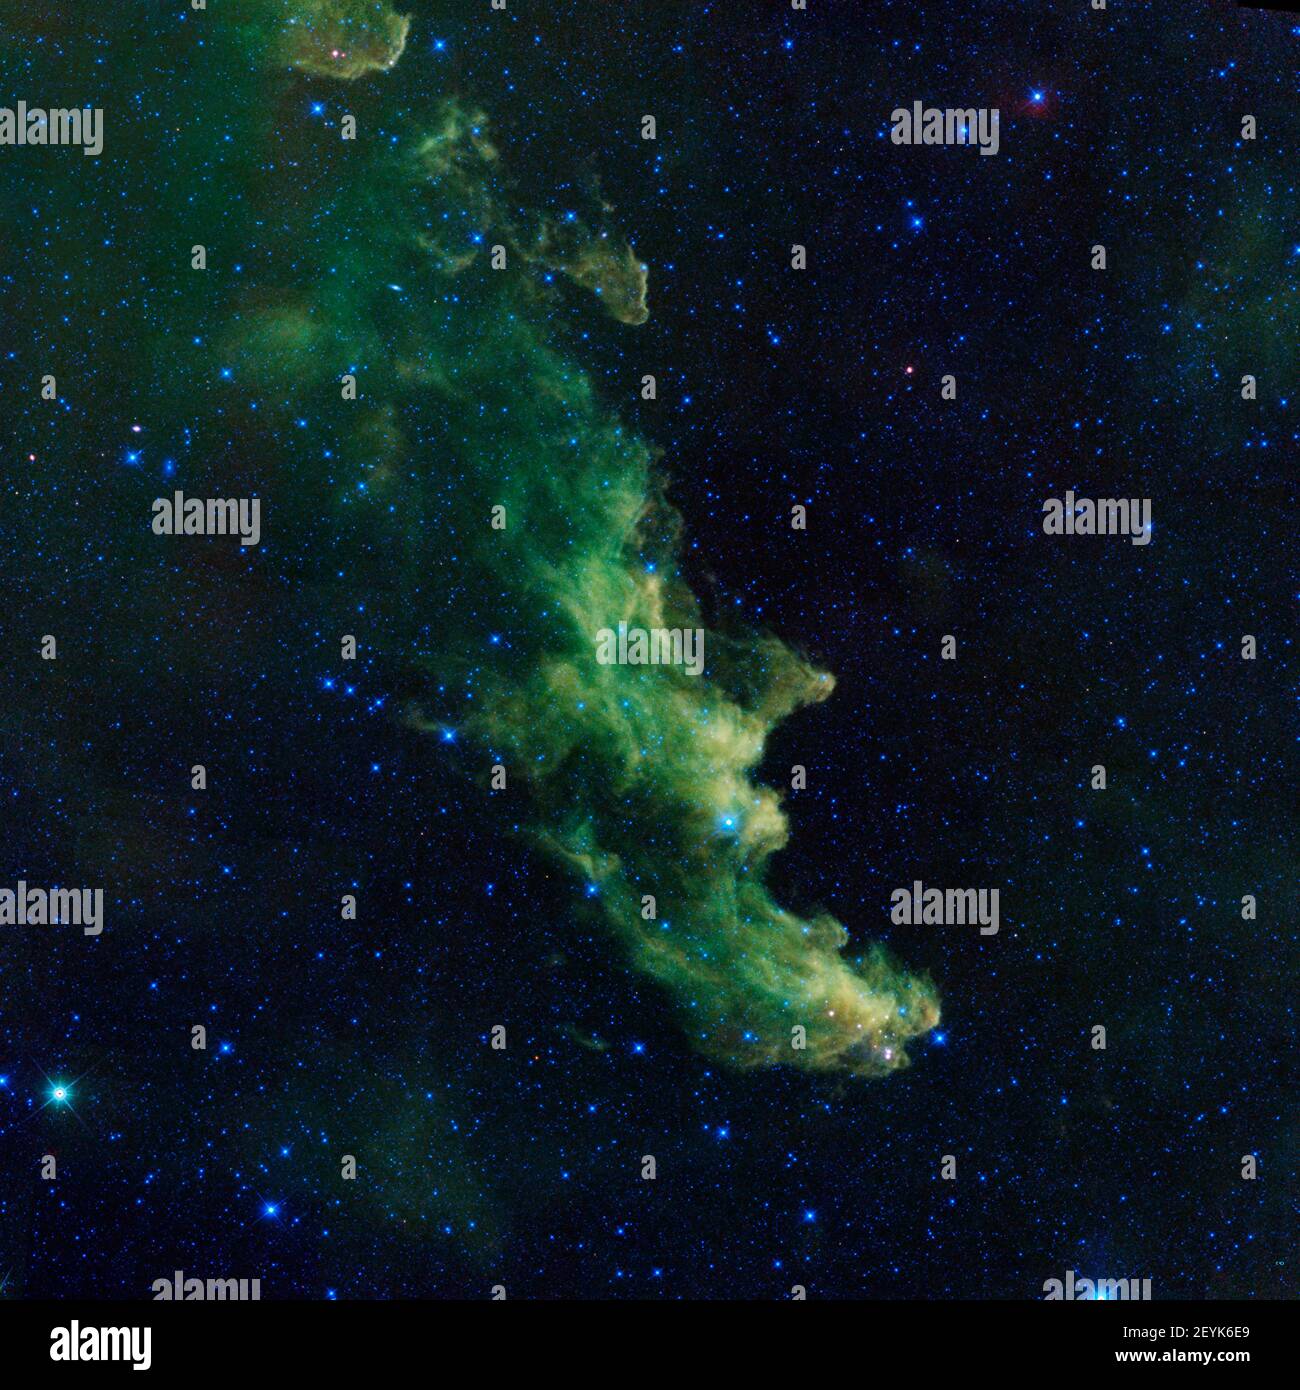 A witch appears to be screaming out into space in this new image from NASA's Wide-Field Infrared Survey Explorer, or WISE. The infrared portrait shows the Witch Head nebula, named after its resemblance to the profile of a wicked witch. Astronomers say the billowy clouds of the nebula, where baby stars are brewing, are being lit up by massive stars. Dust in the cloud is being hit with starlight, causing it to glow with infrared light, which was picked up by WISE's detectors. The Witch Head nebula is estimated to be hundreds of light-years away in the Orion constellation, just off the famous hun Stock Photo